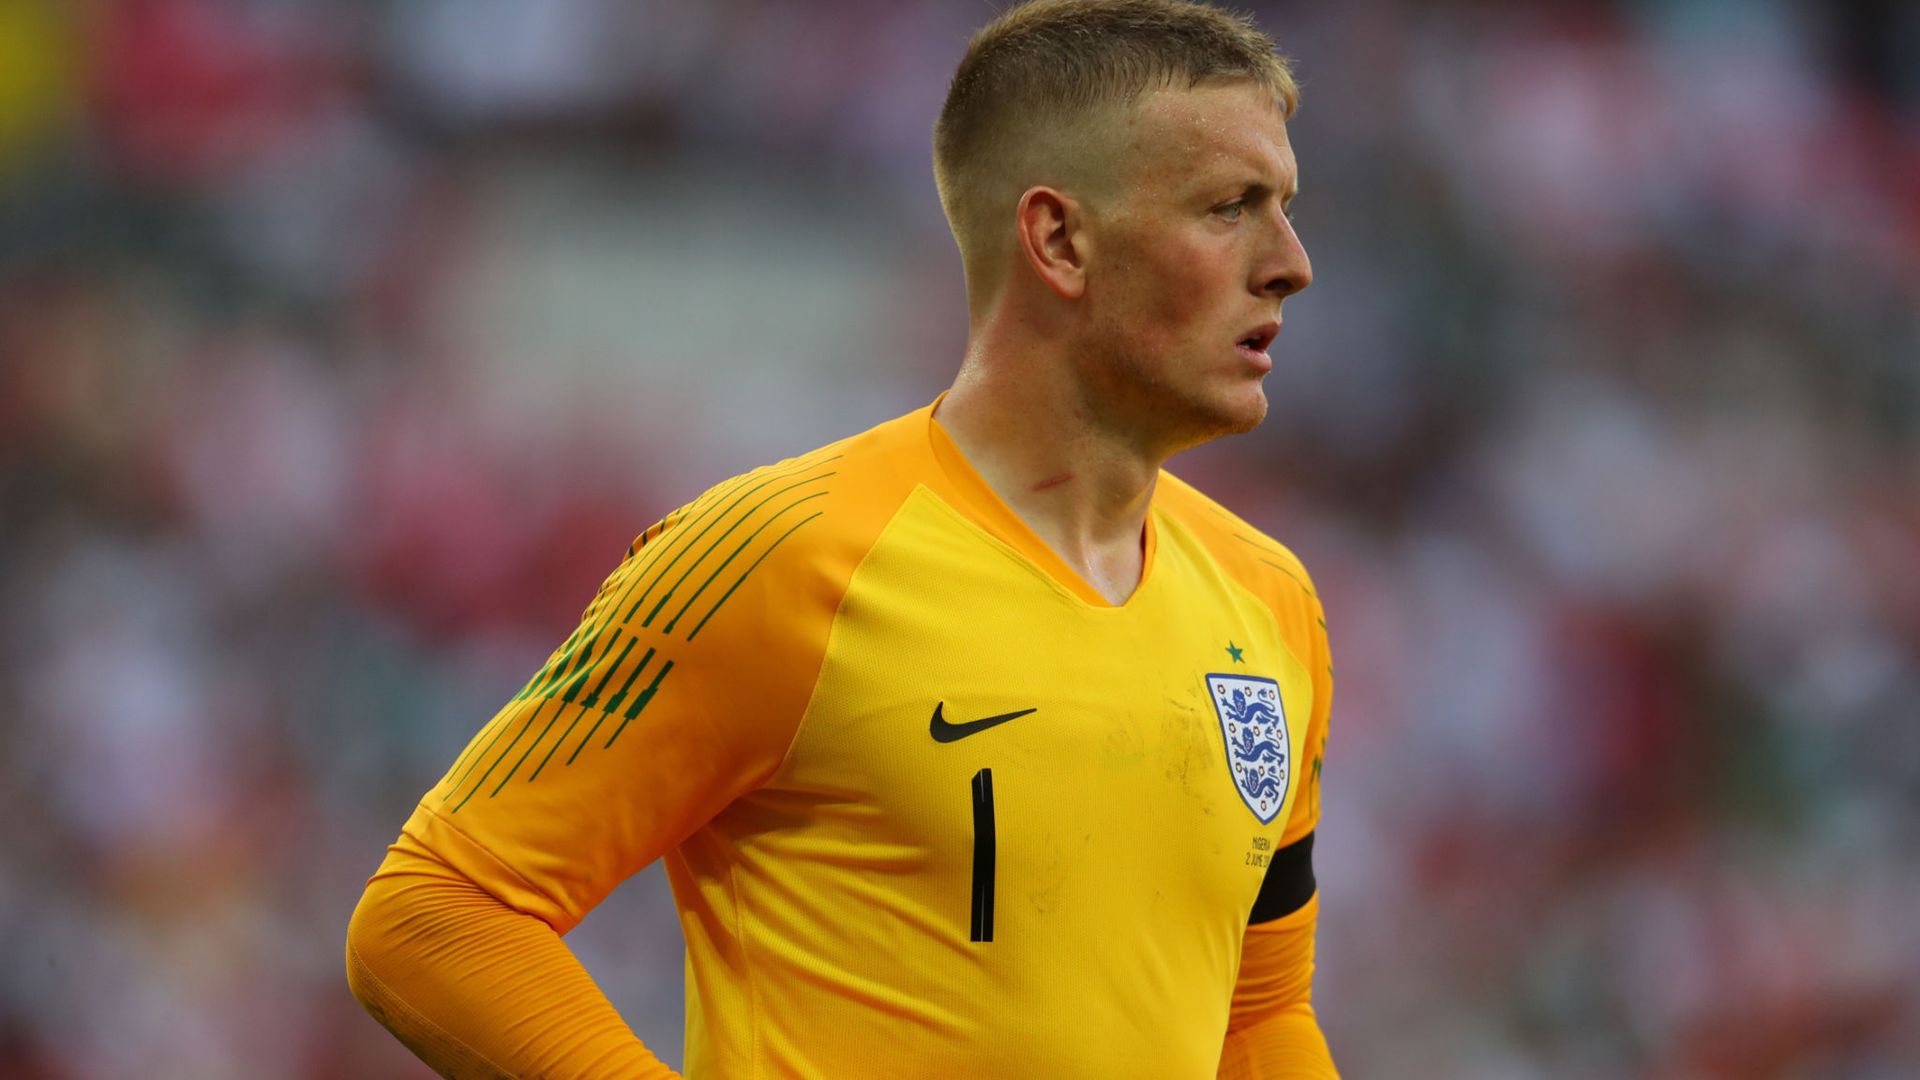 Jordan Pickford hits back at Courtois after England’s win over Colombia